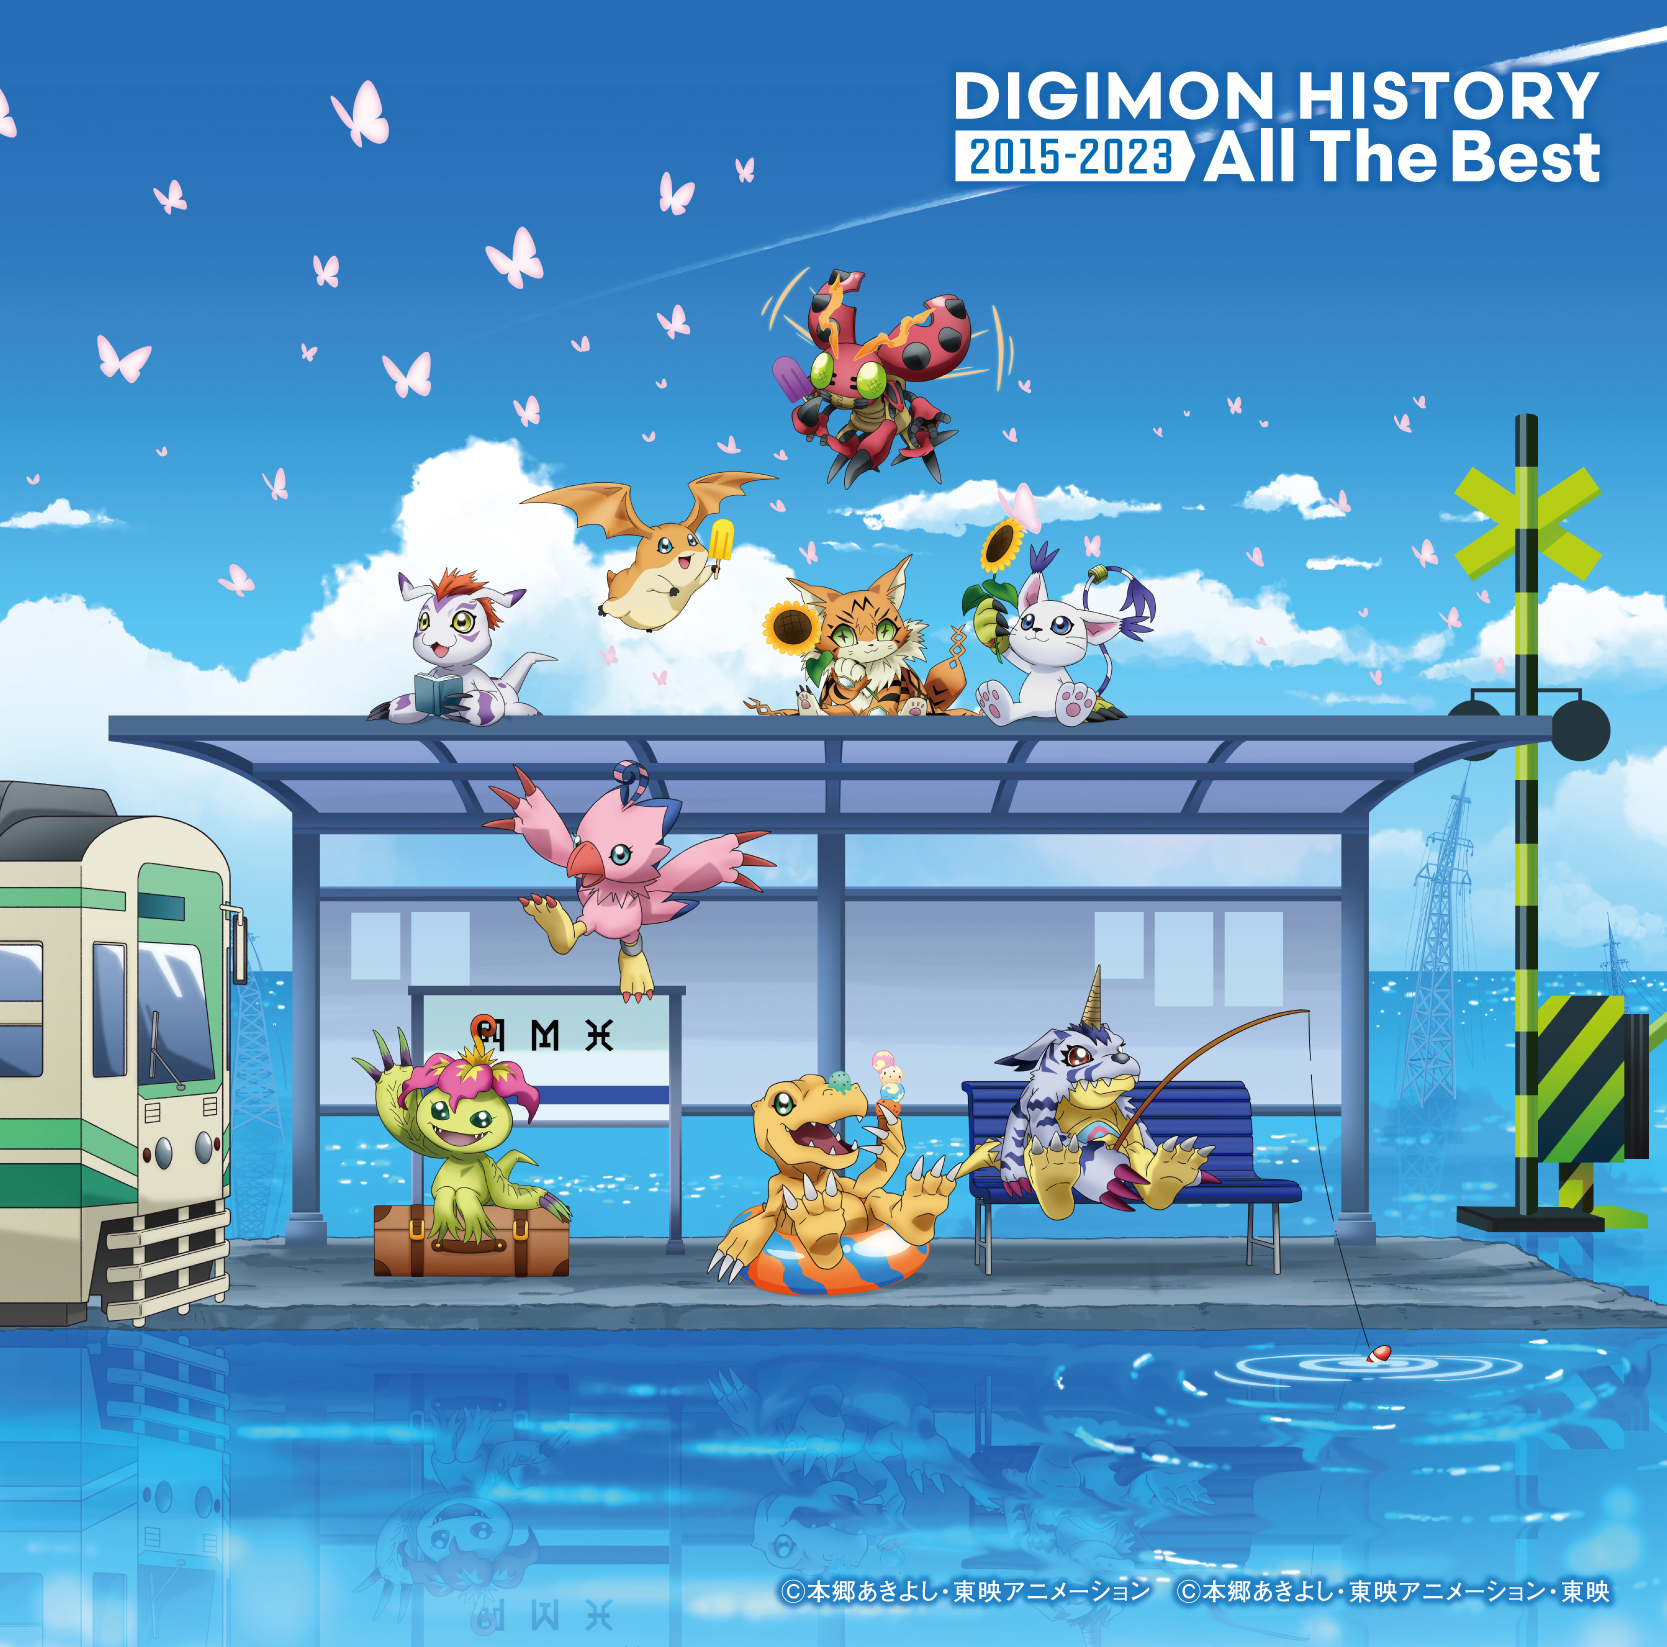 「DIGIMON HISTORY 2015-2023 All The Best」／Various Artists